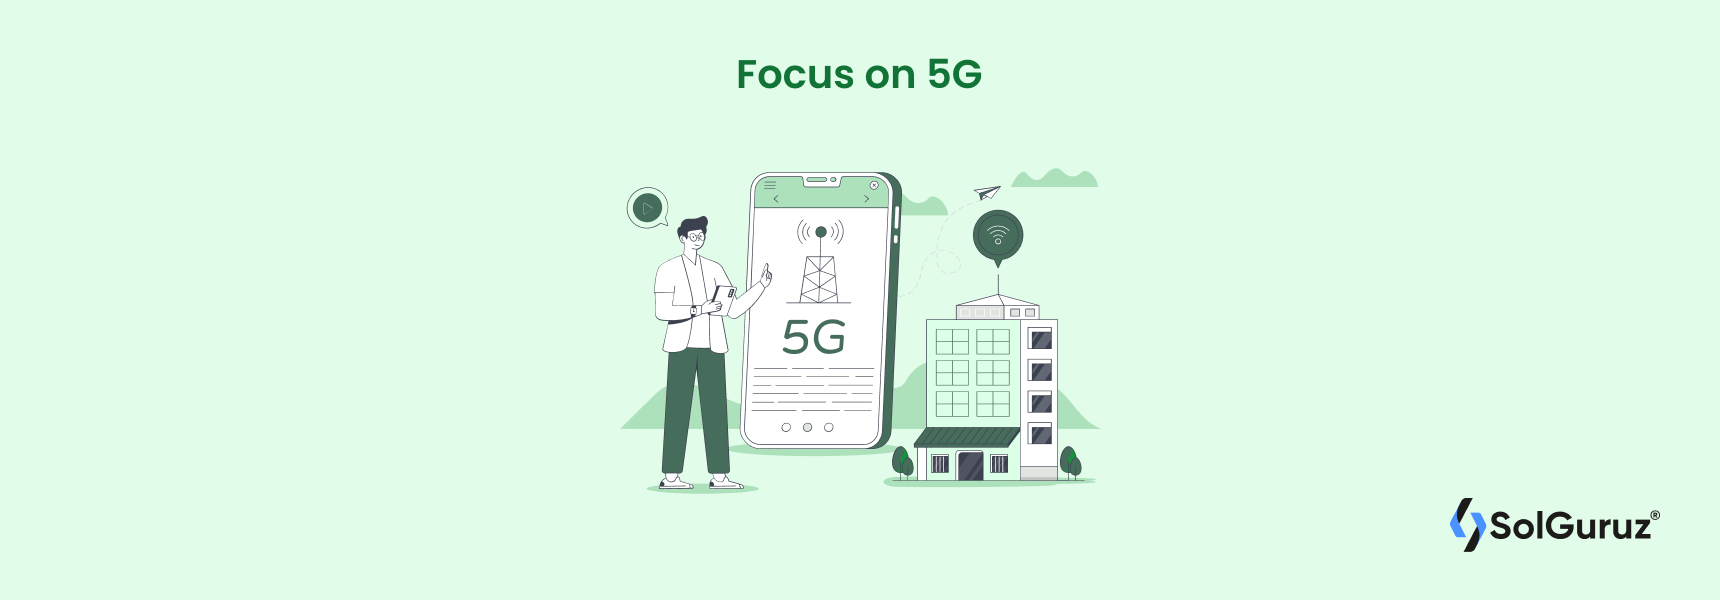 Focus on 5G is one of the android development trends